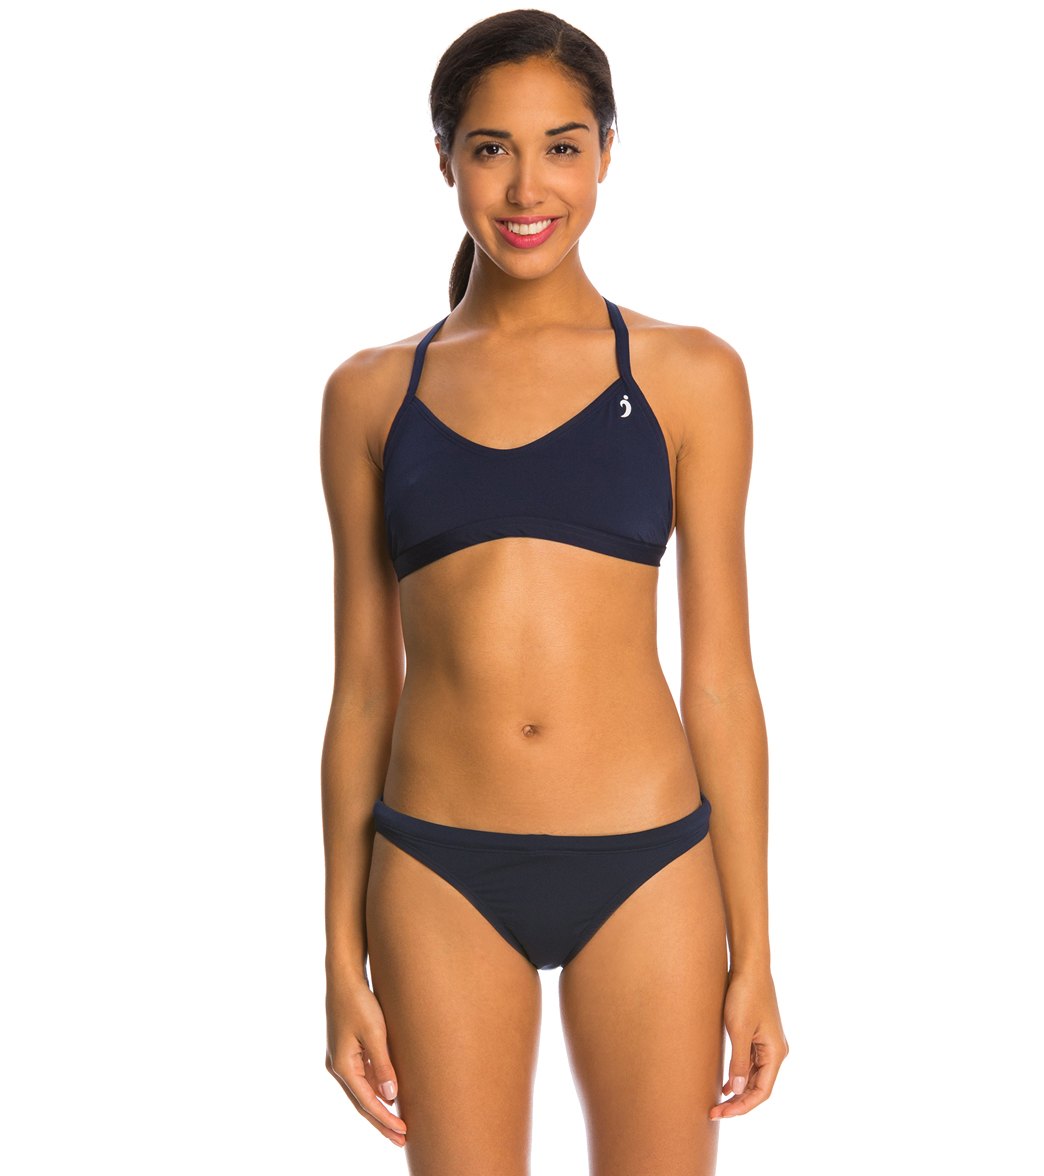 Illusions Activewear Illusions Navy Two Piece Swimsuit Set - 26 Lycra®/Polyester/Spandex - Swimoutlet.com